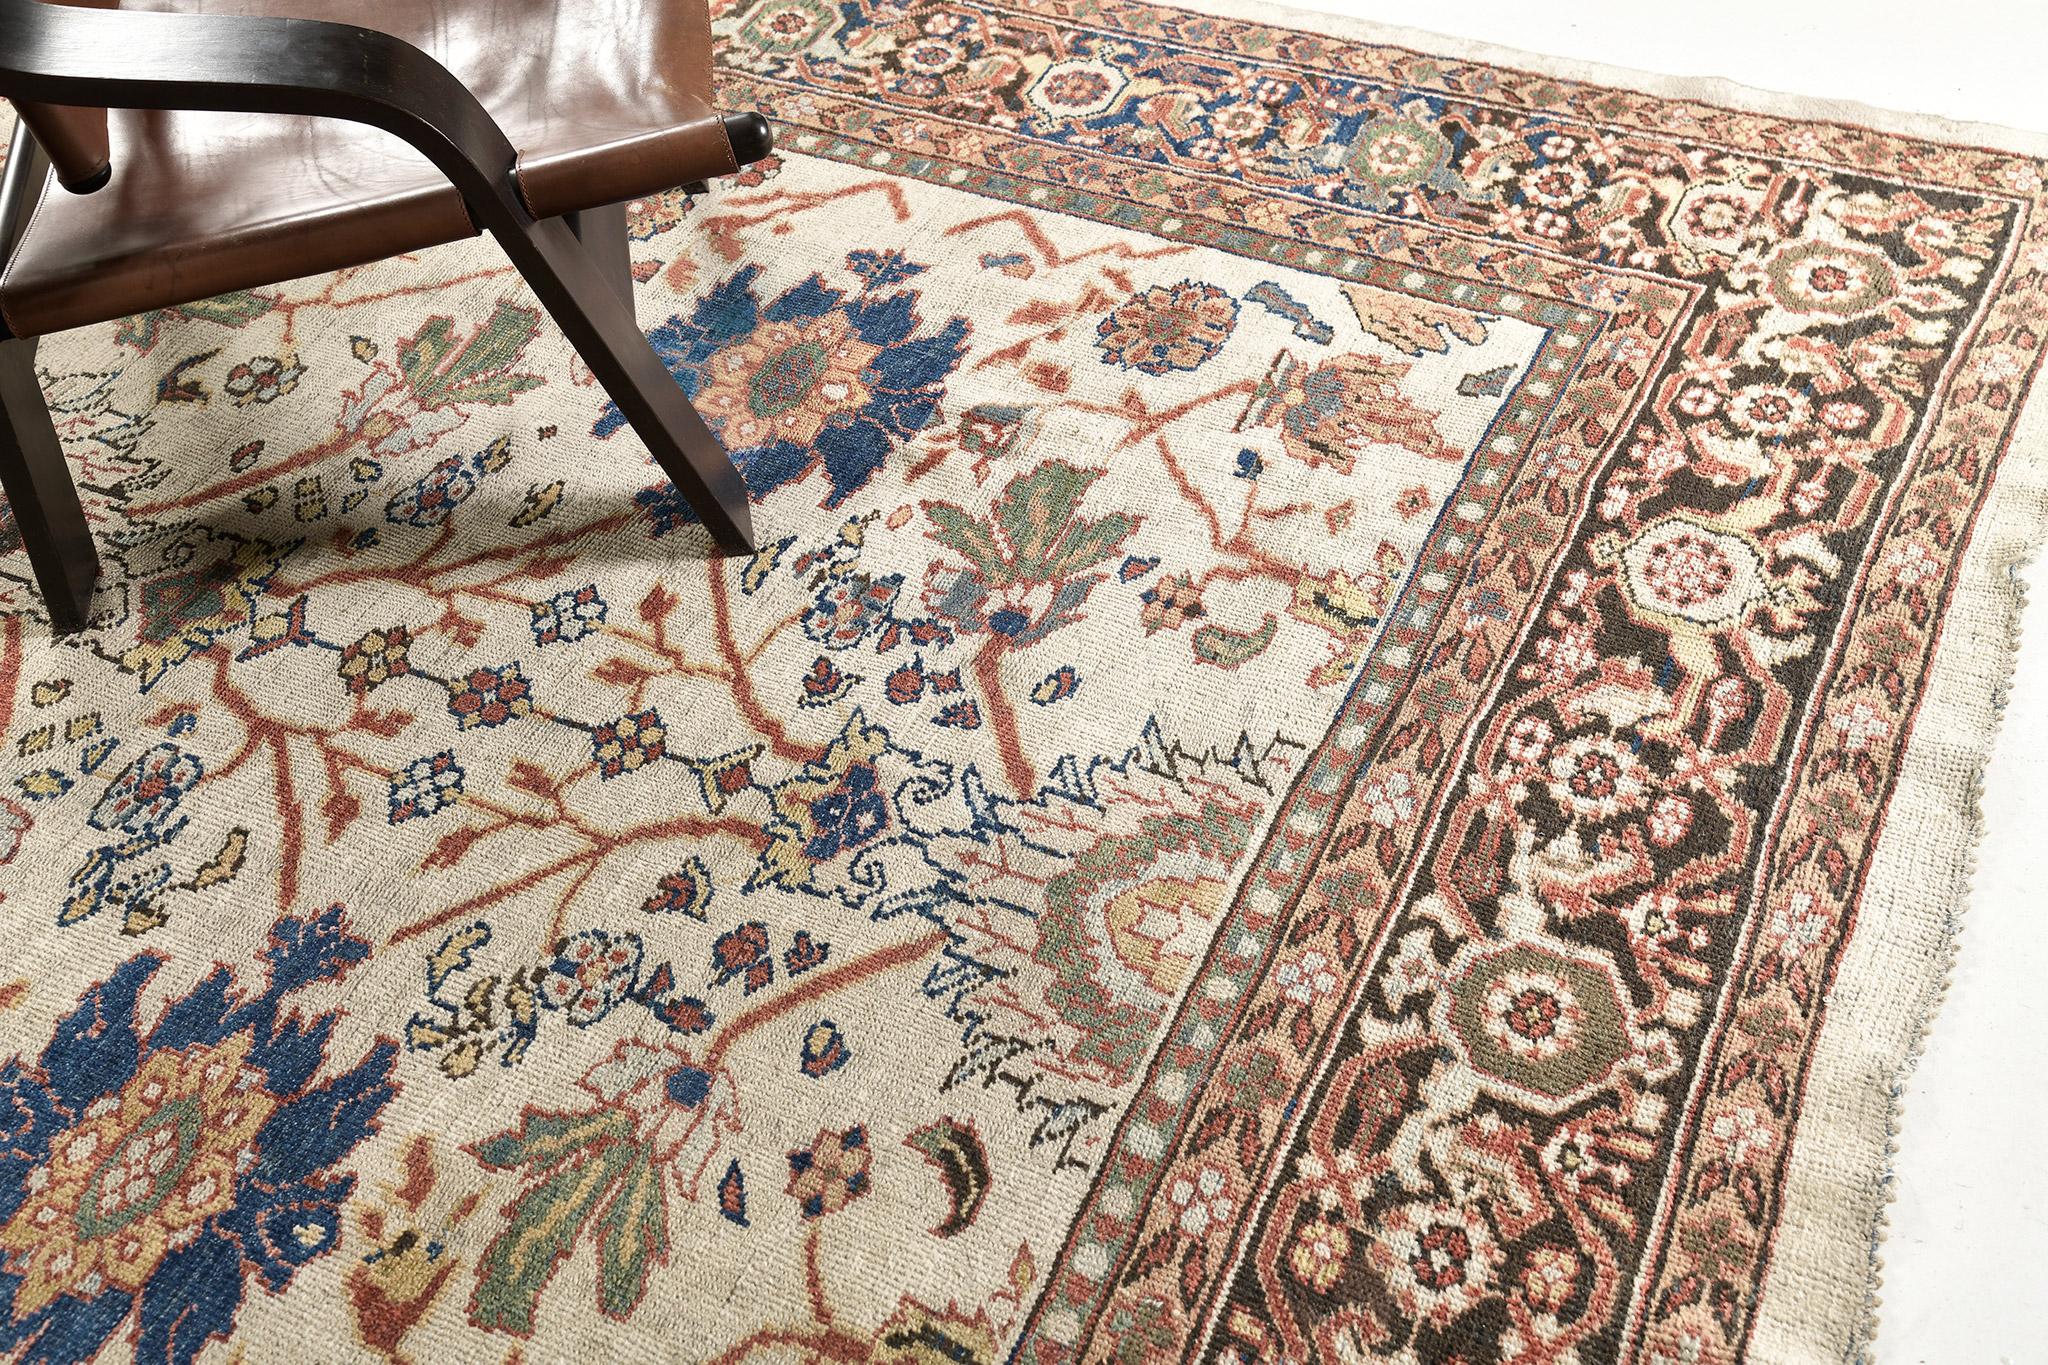 This amazing Ziegler Persian rug features a combination of earthy warm and cool-toned embellishments, a cinnamon border, and rust motifs throughout. An all-over design with an intricate floral lattice pattern and balanced density in stylized floral